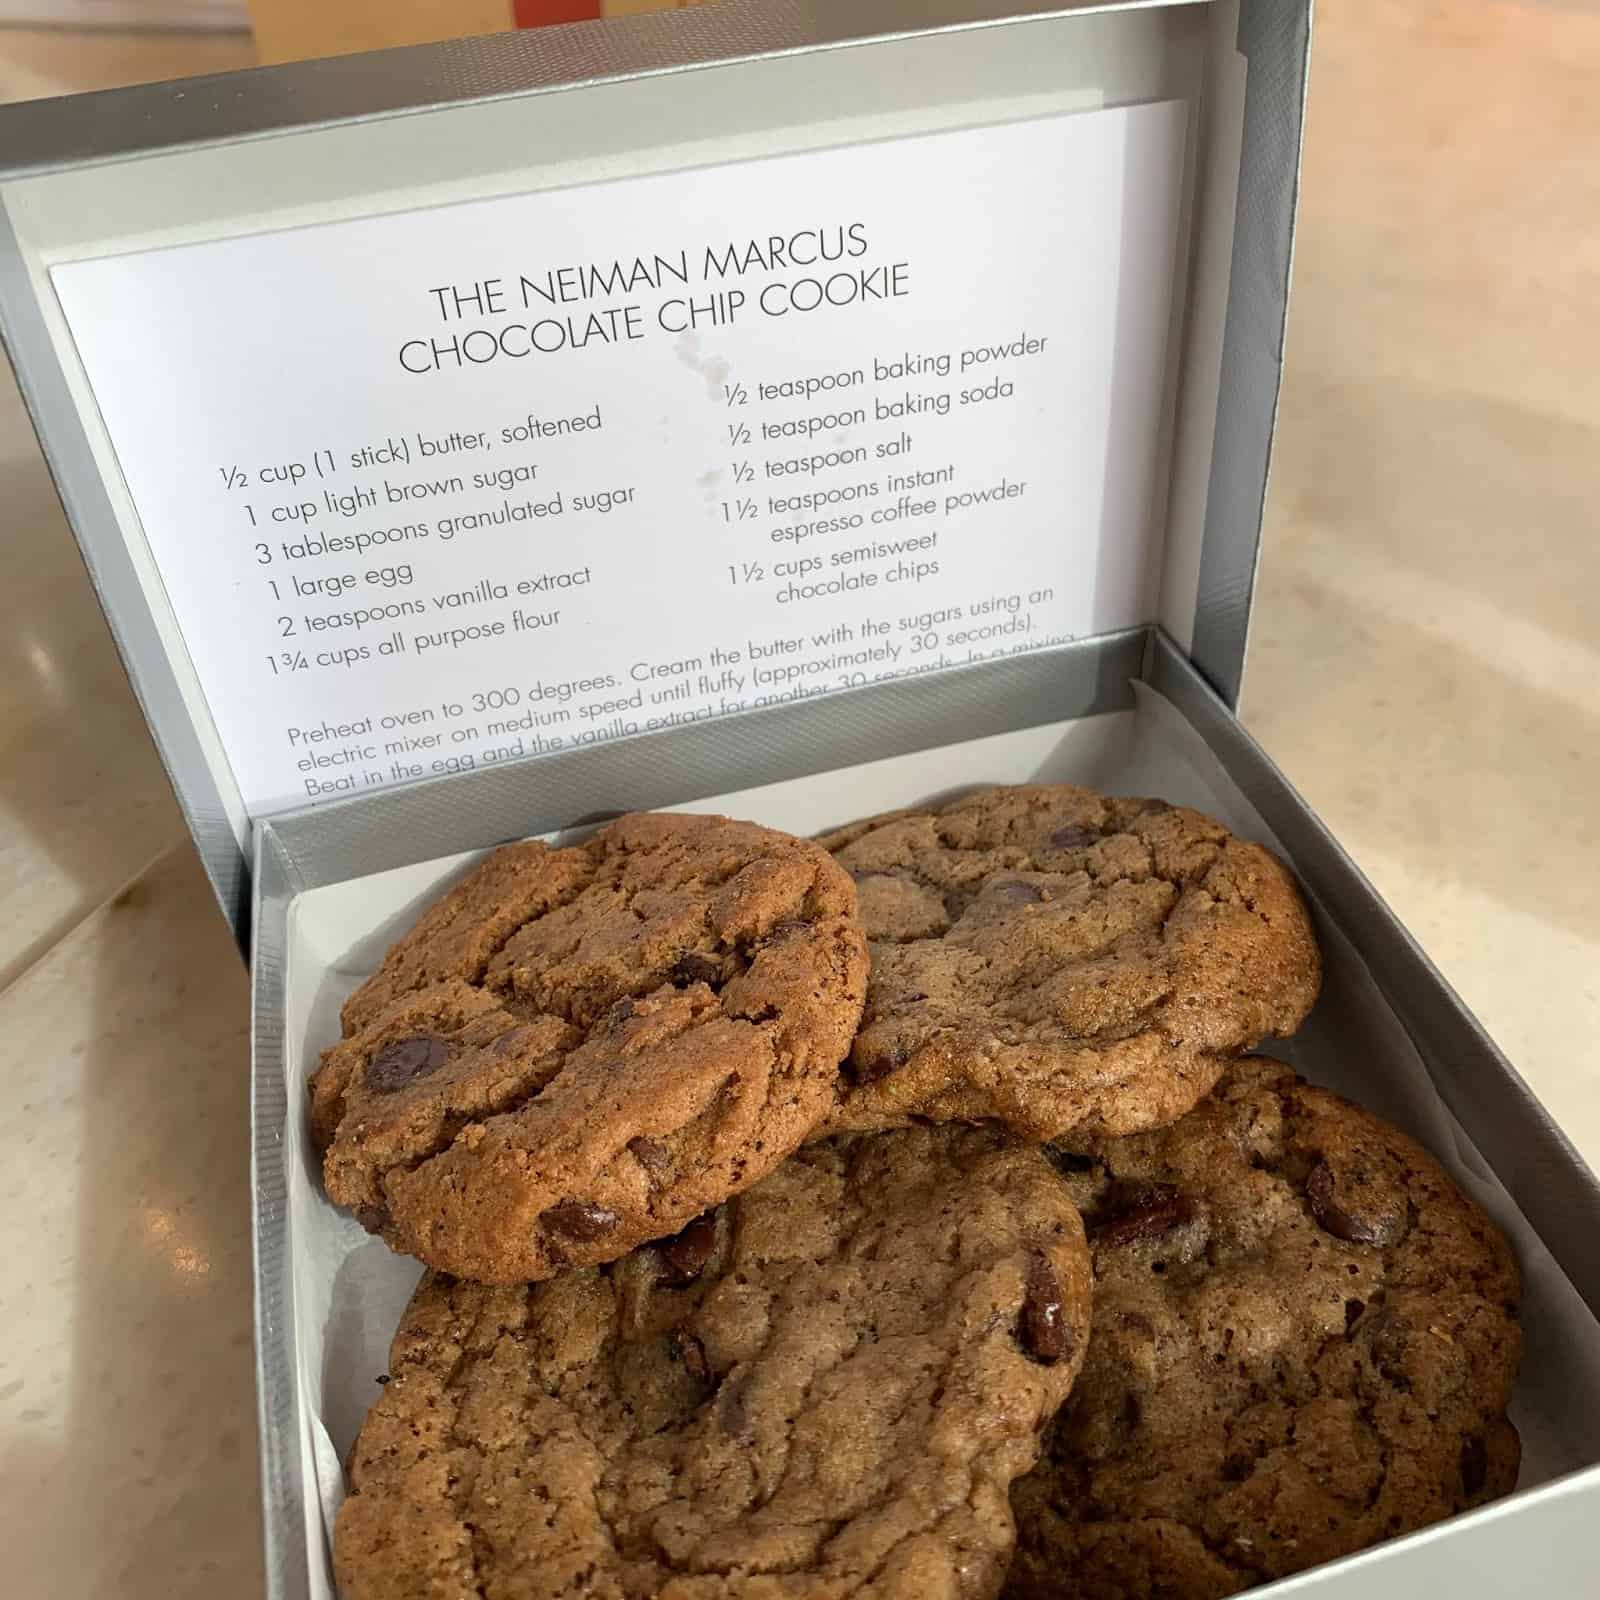 Chocolate chip cookies presented in a box at Neiman Marcus